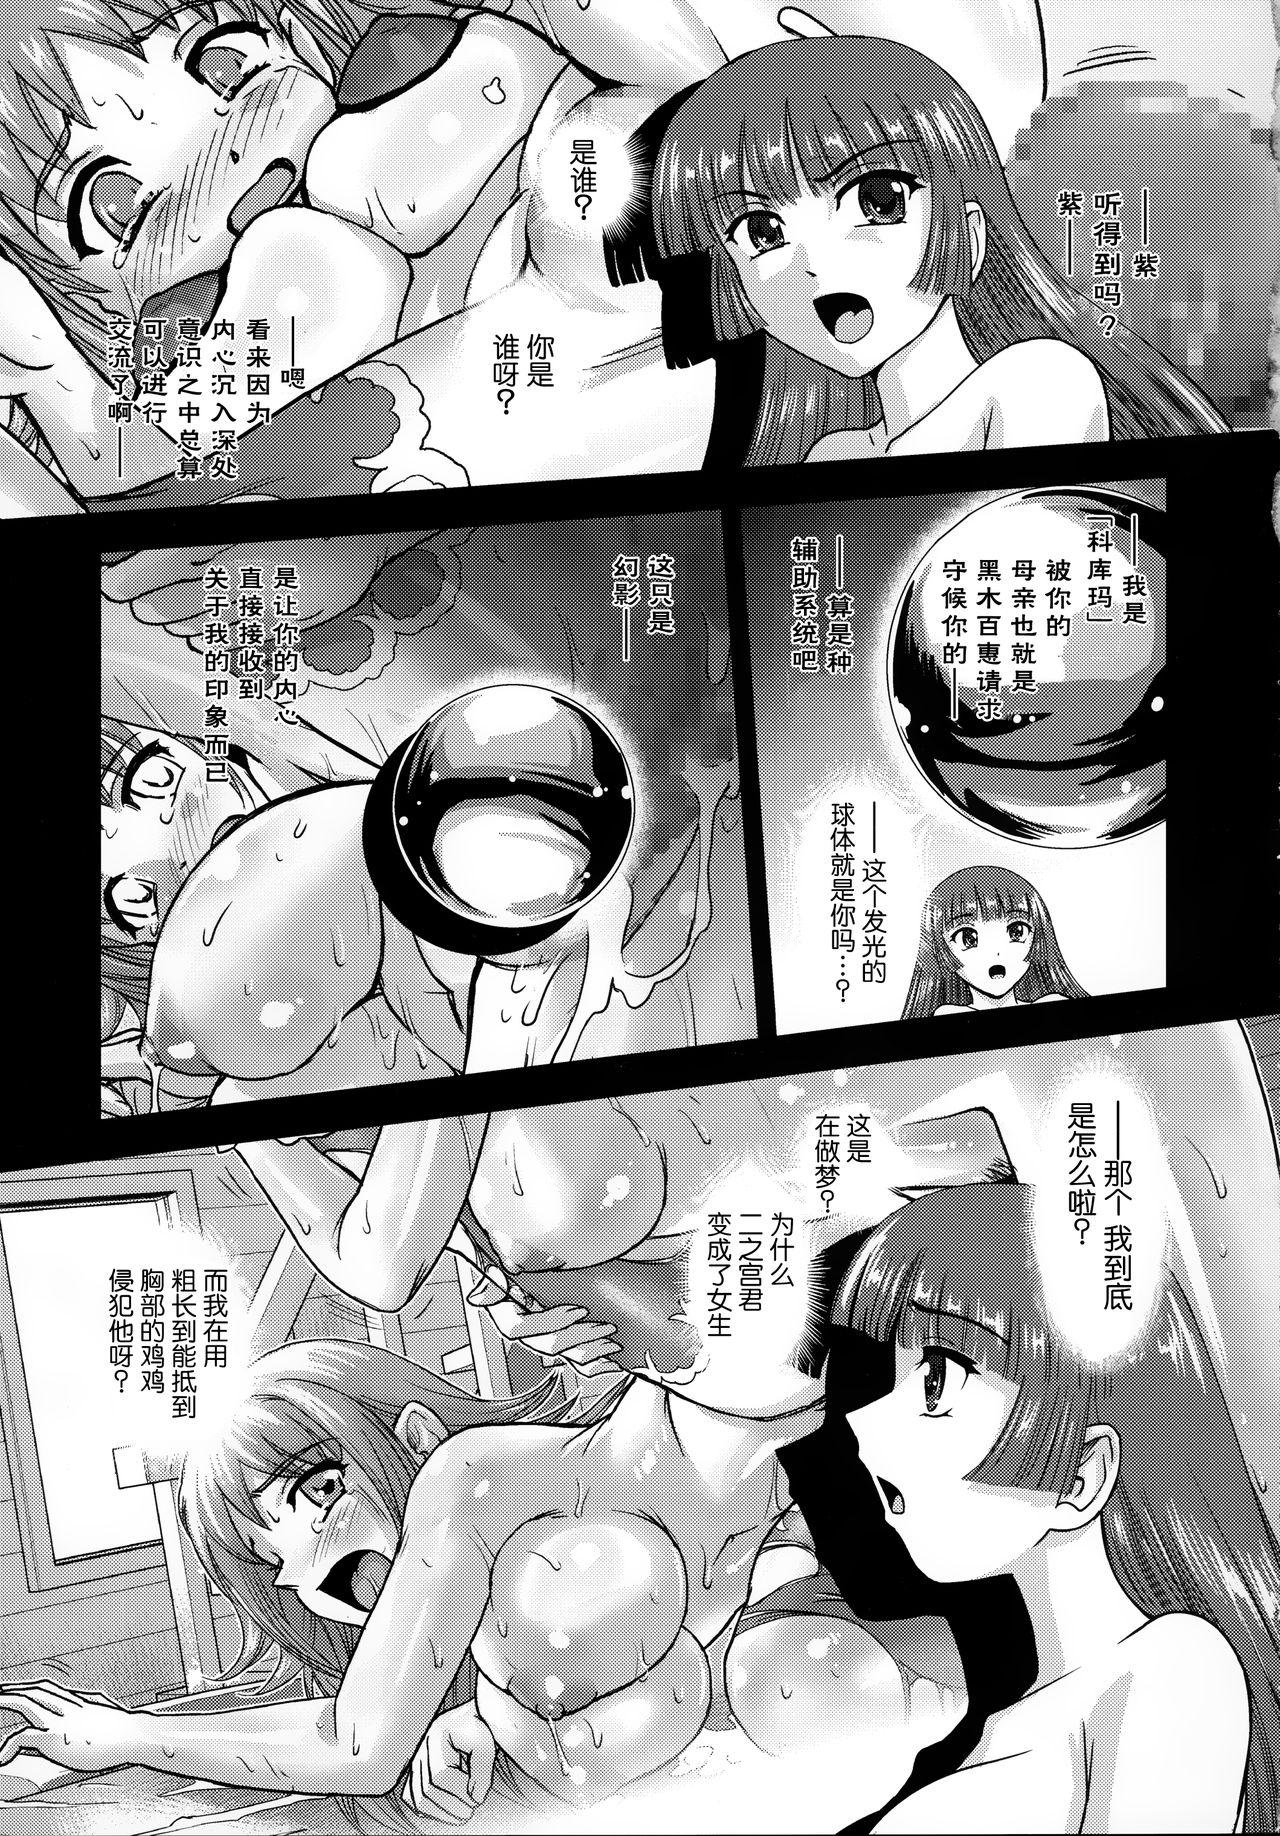 Puba (C95) [Behind Moon (Dulce-Q)] DR:II ep.7 ~Dulce Report~ | 达西报告II Ep.7 [Chinese] [鬼畜王汉化组] - Original Indonesian - Page 5